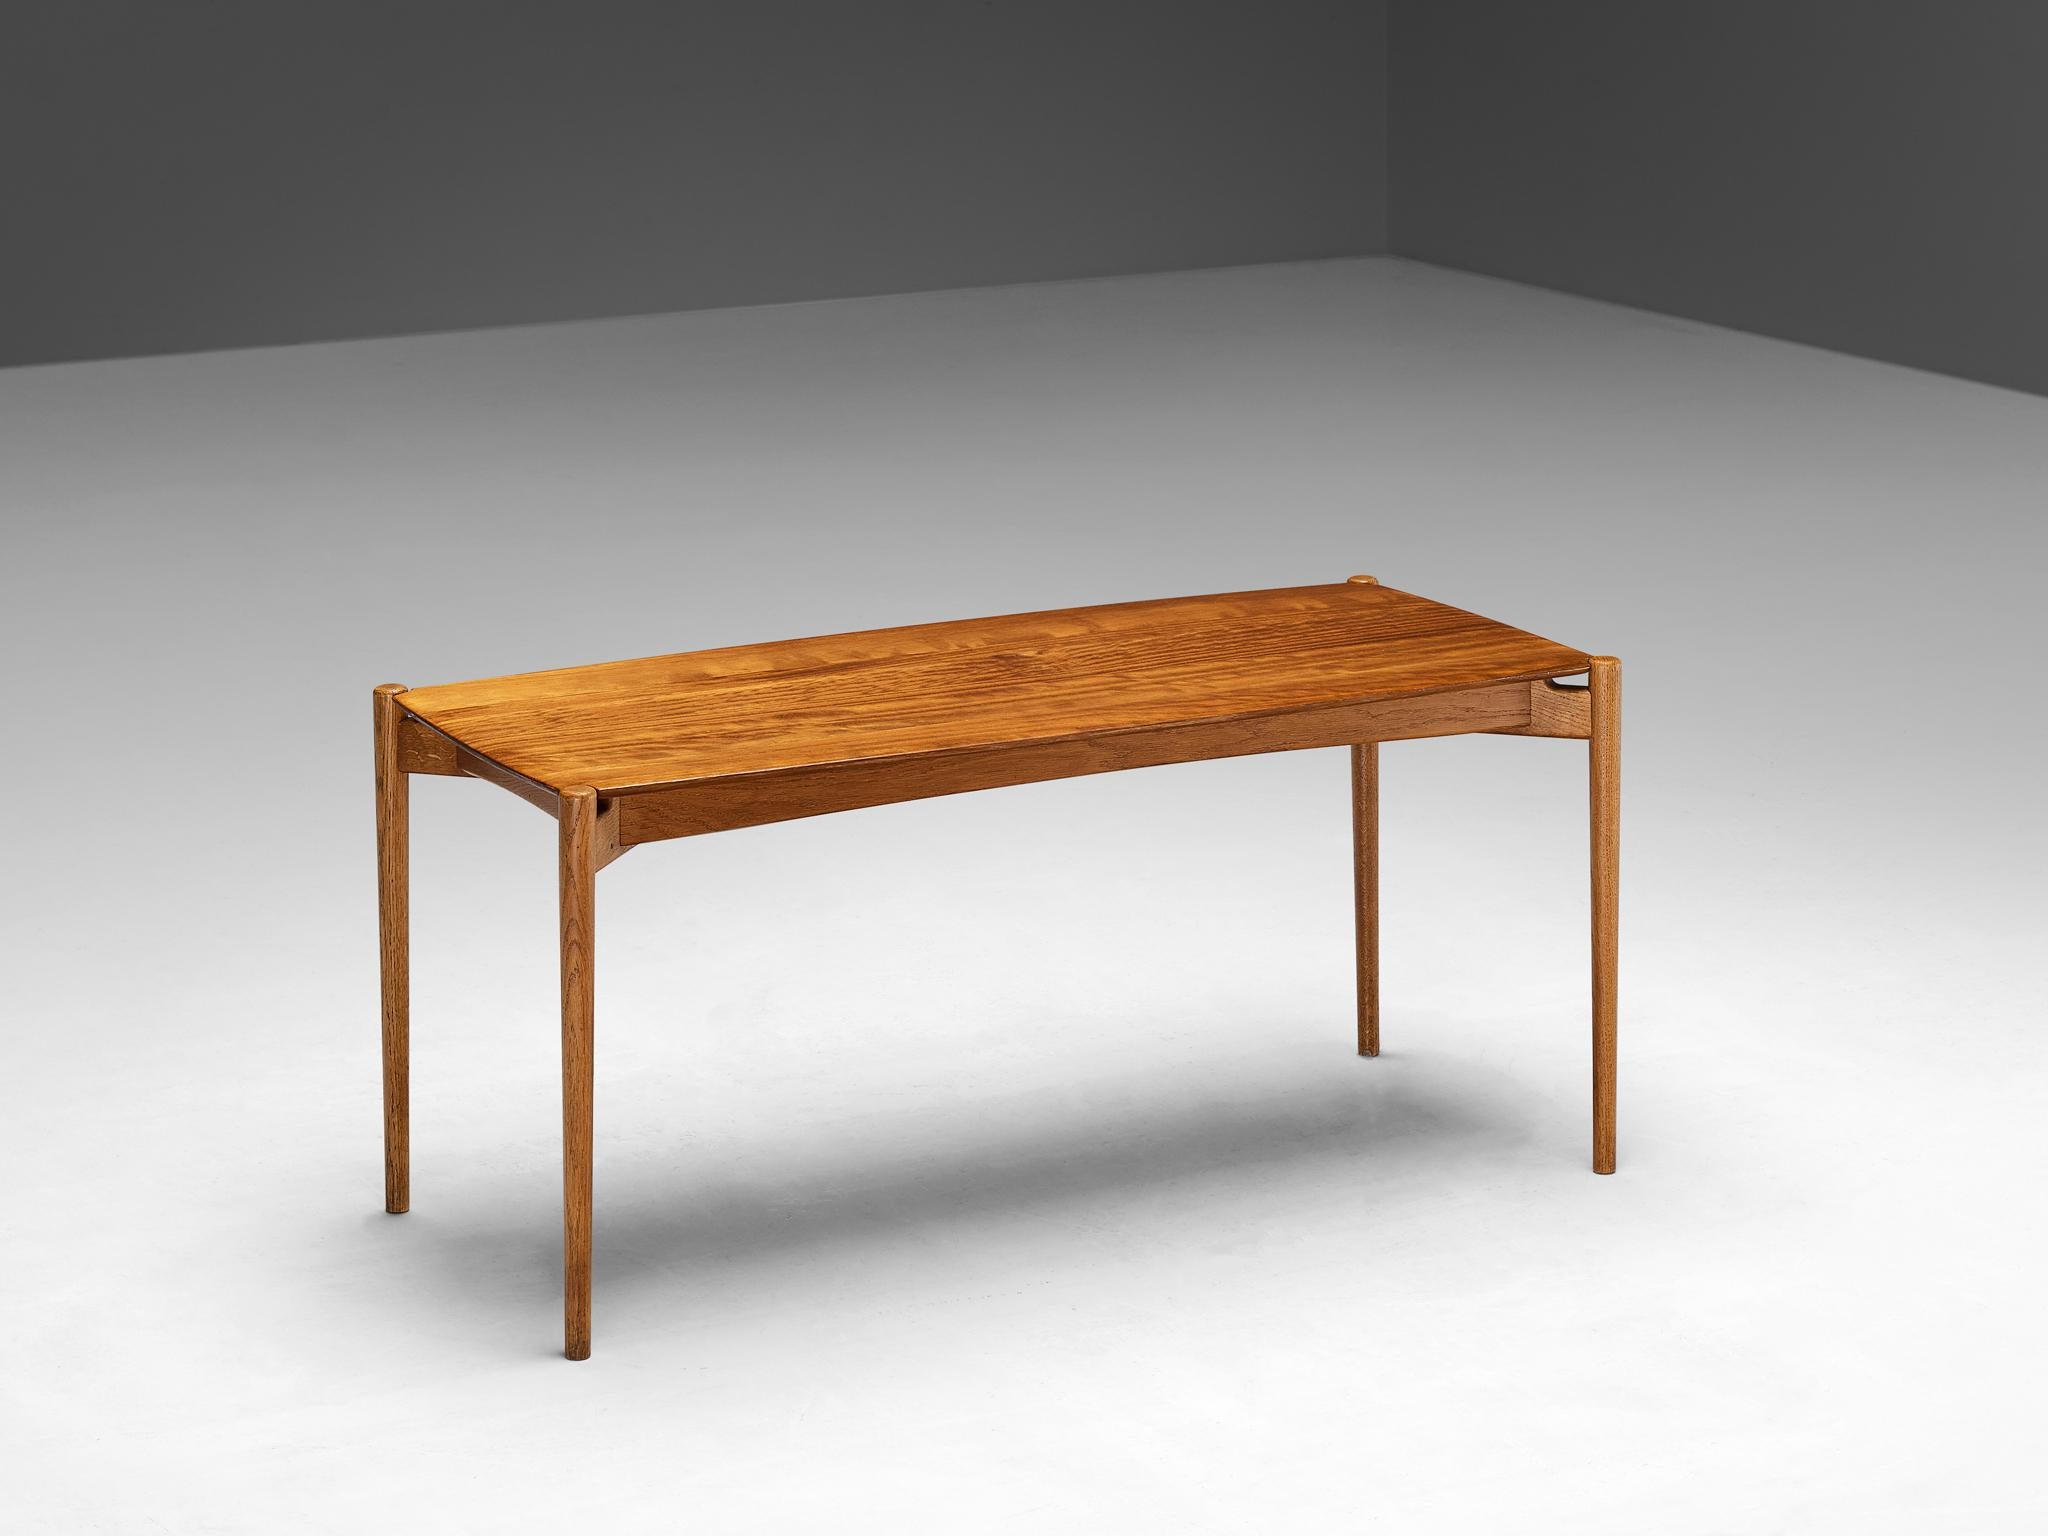 Coffee table, afrormosia, mahogany, Scandinavia, 1960s

Originating from 1960s Scandinavia, this coffee table showcases a dual wood composition in its design. The design shows a strong and solid construction. This is realized by the sharp and clear